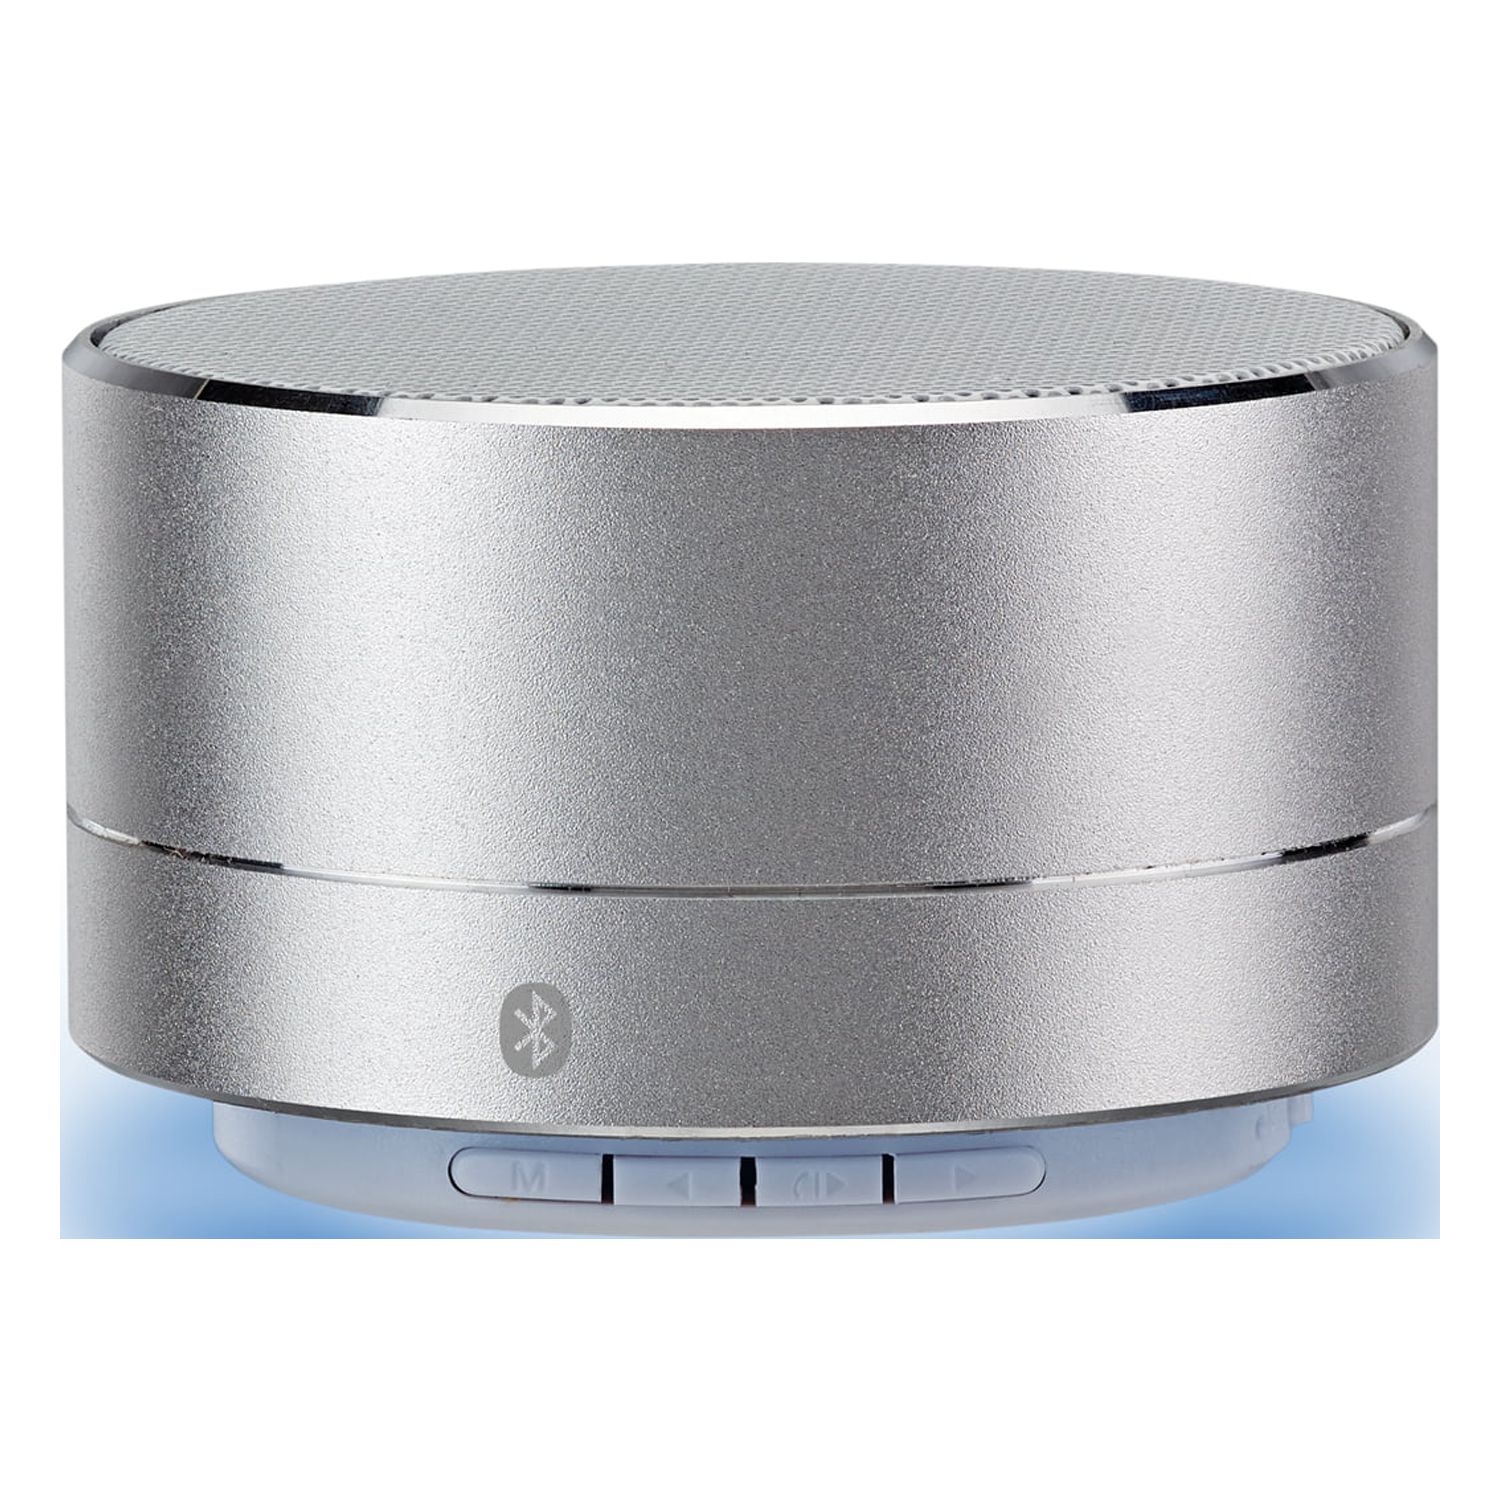 iLive Portable Bluetooth Speaker, Silver, ISB08 - image 1 of 6